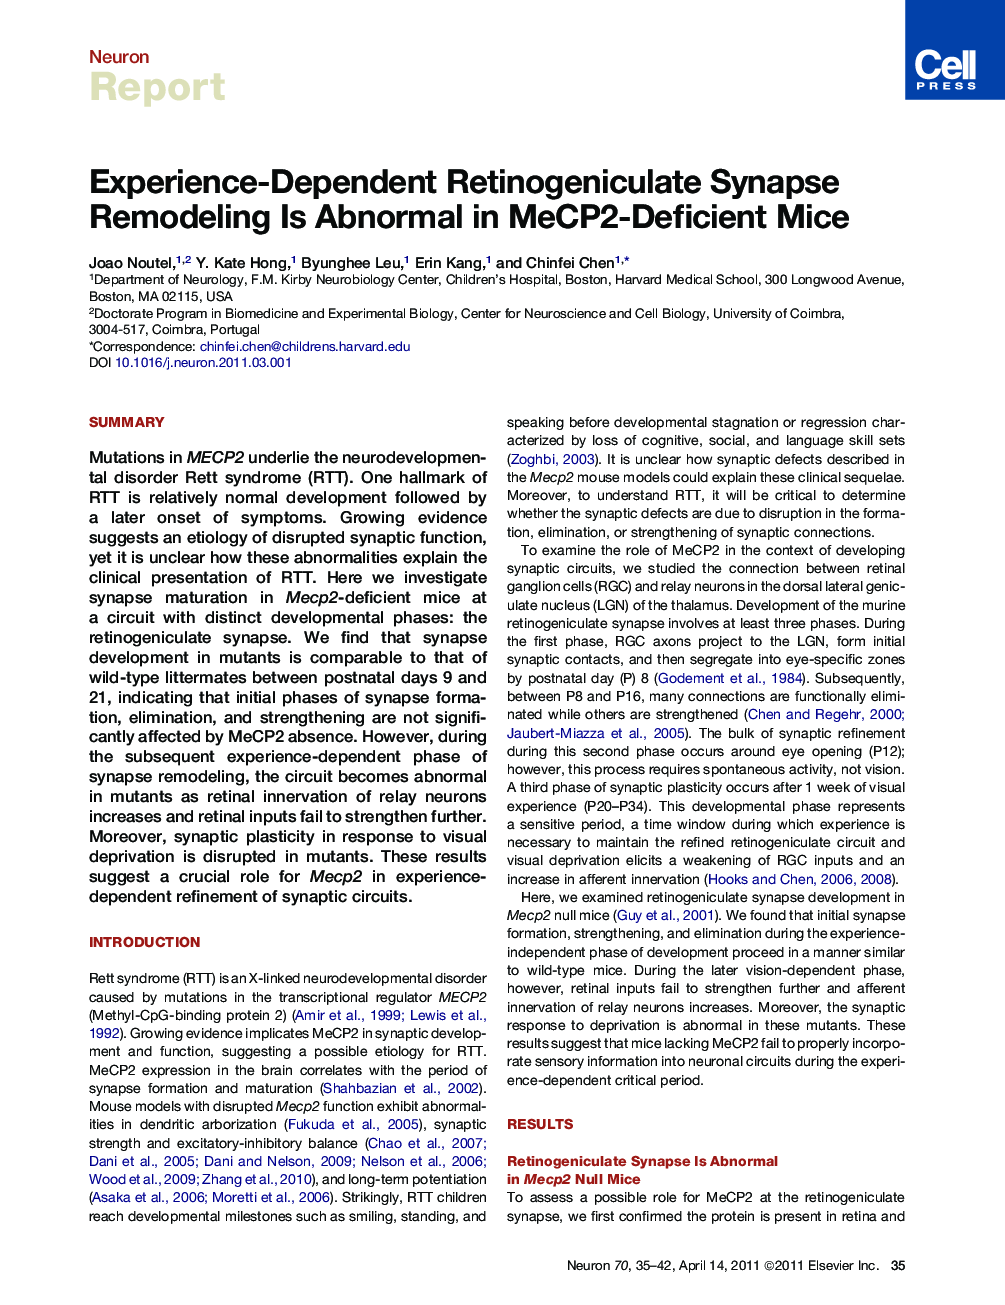 Experience-Dependent Retinogeniculate Synapse Remodeling Is Abnormal in MeCP2-Deficient Mice